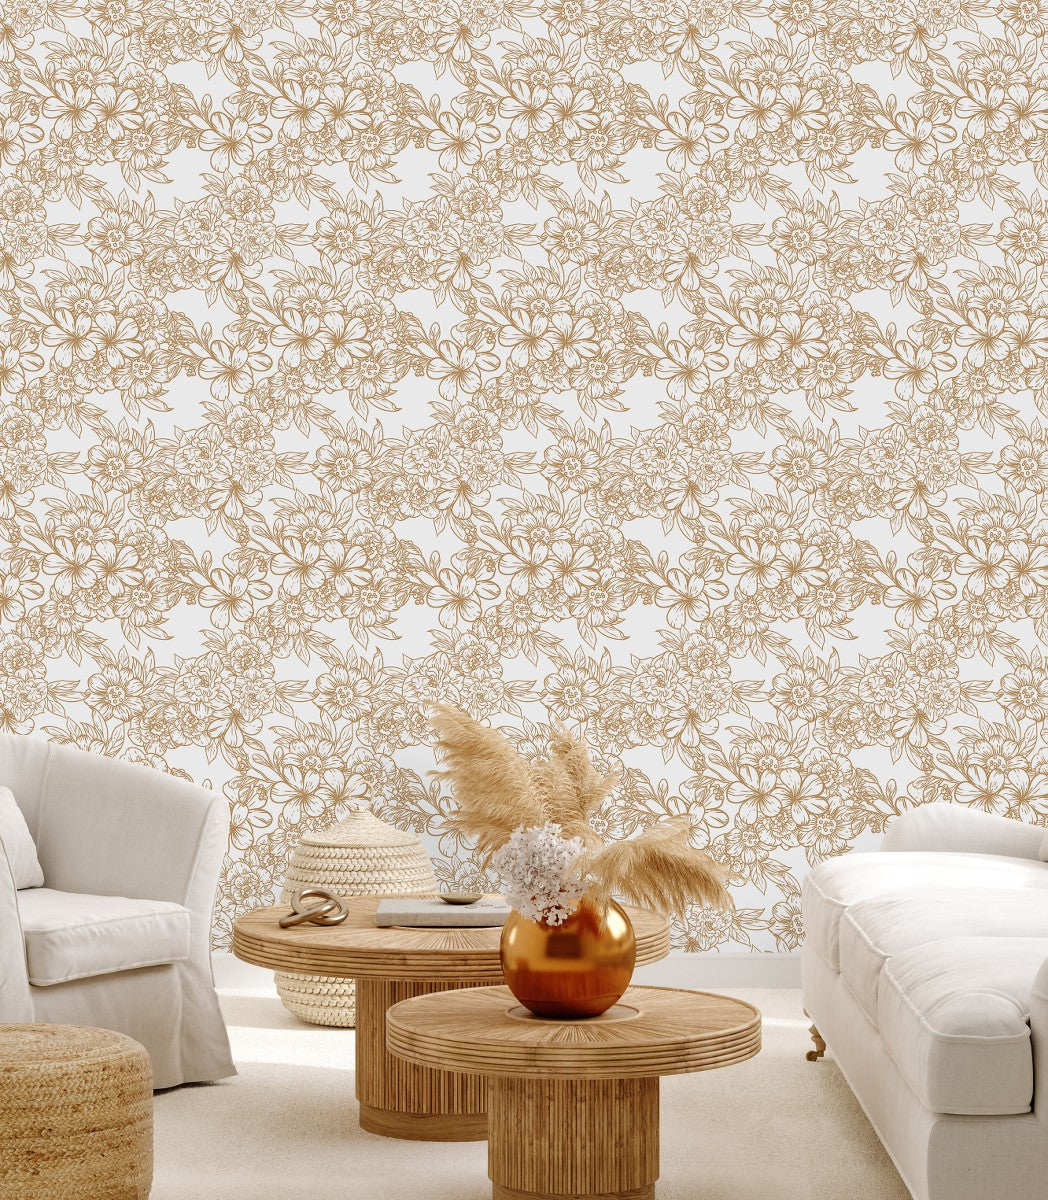 Revival  Floral wallcovering from Nilaya by Asian Paints